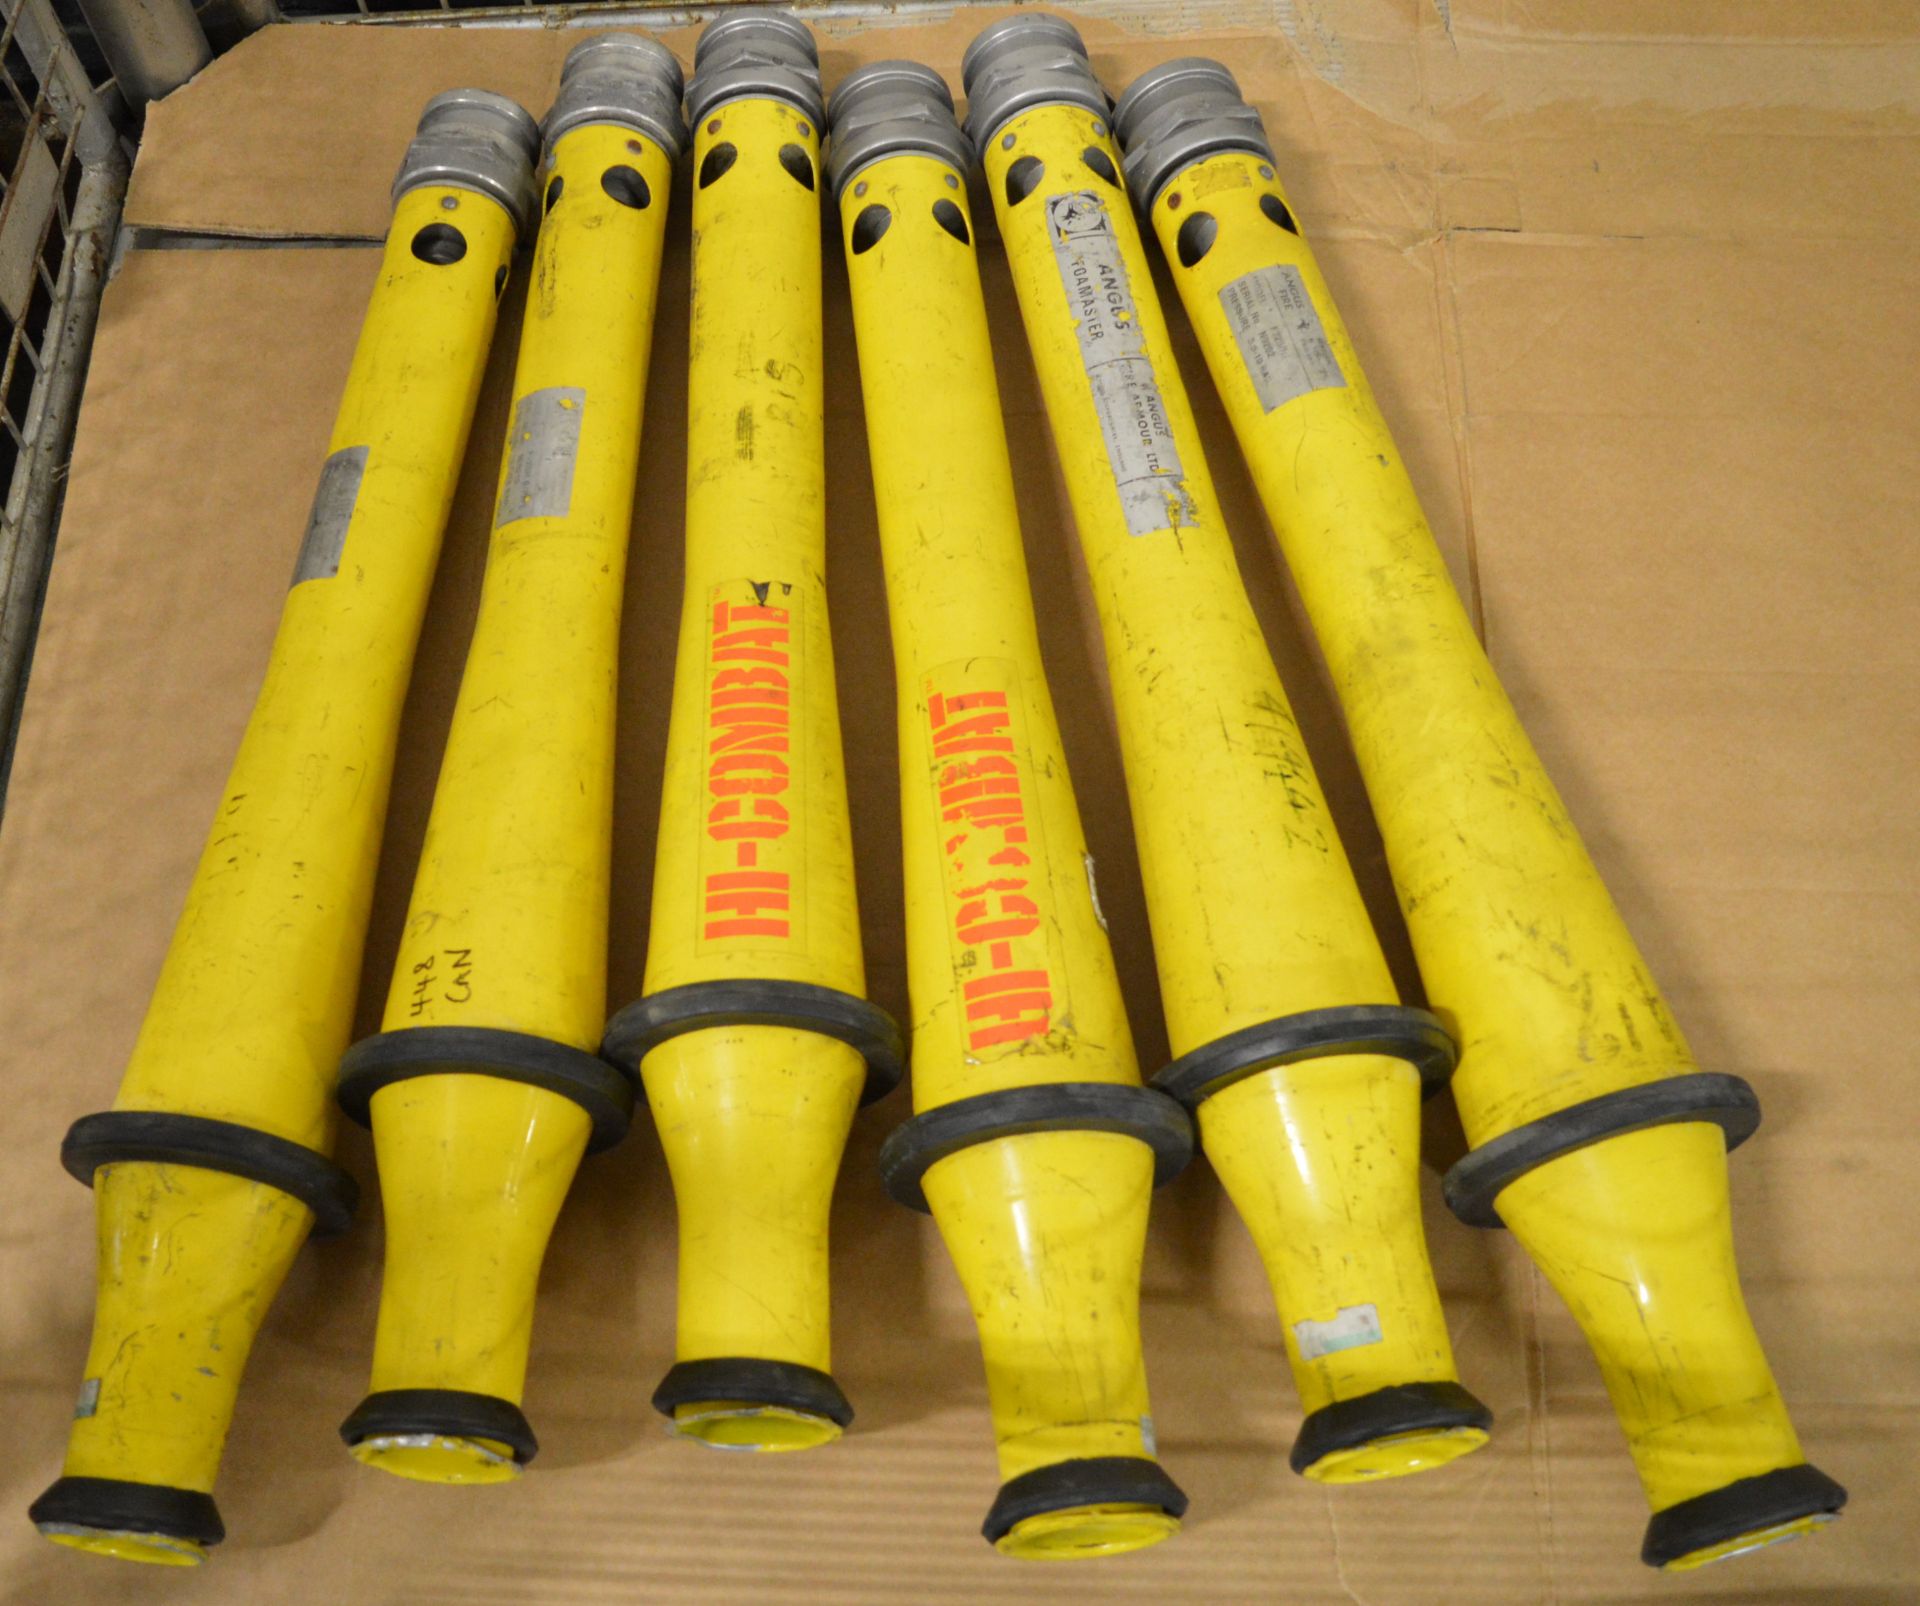 6x Angus Foamaster Nozzles. - Image 2 of 3